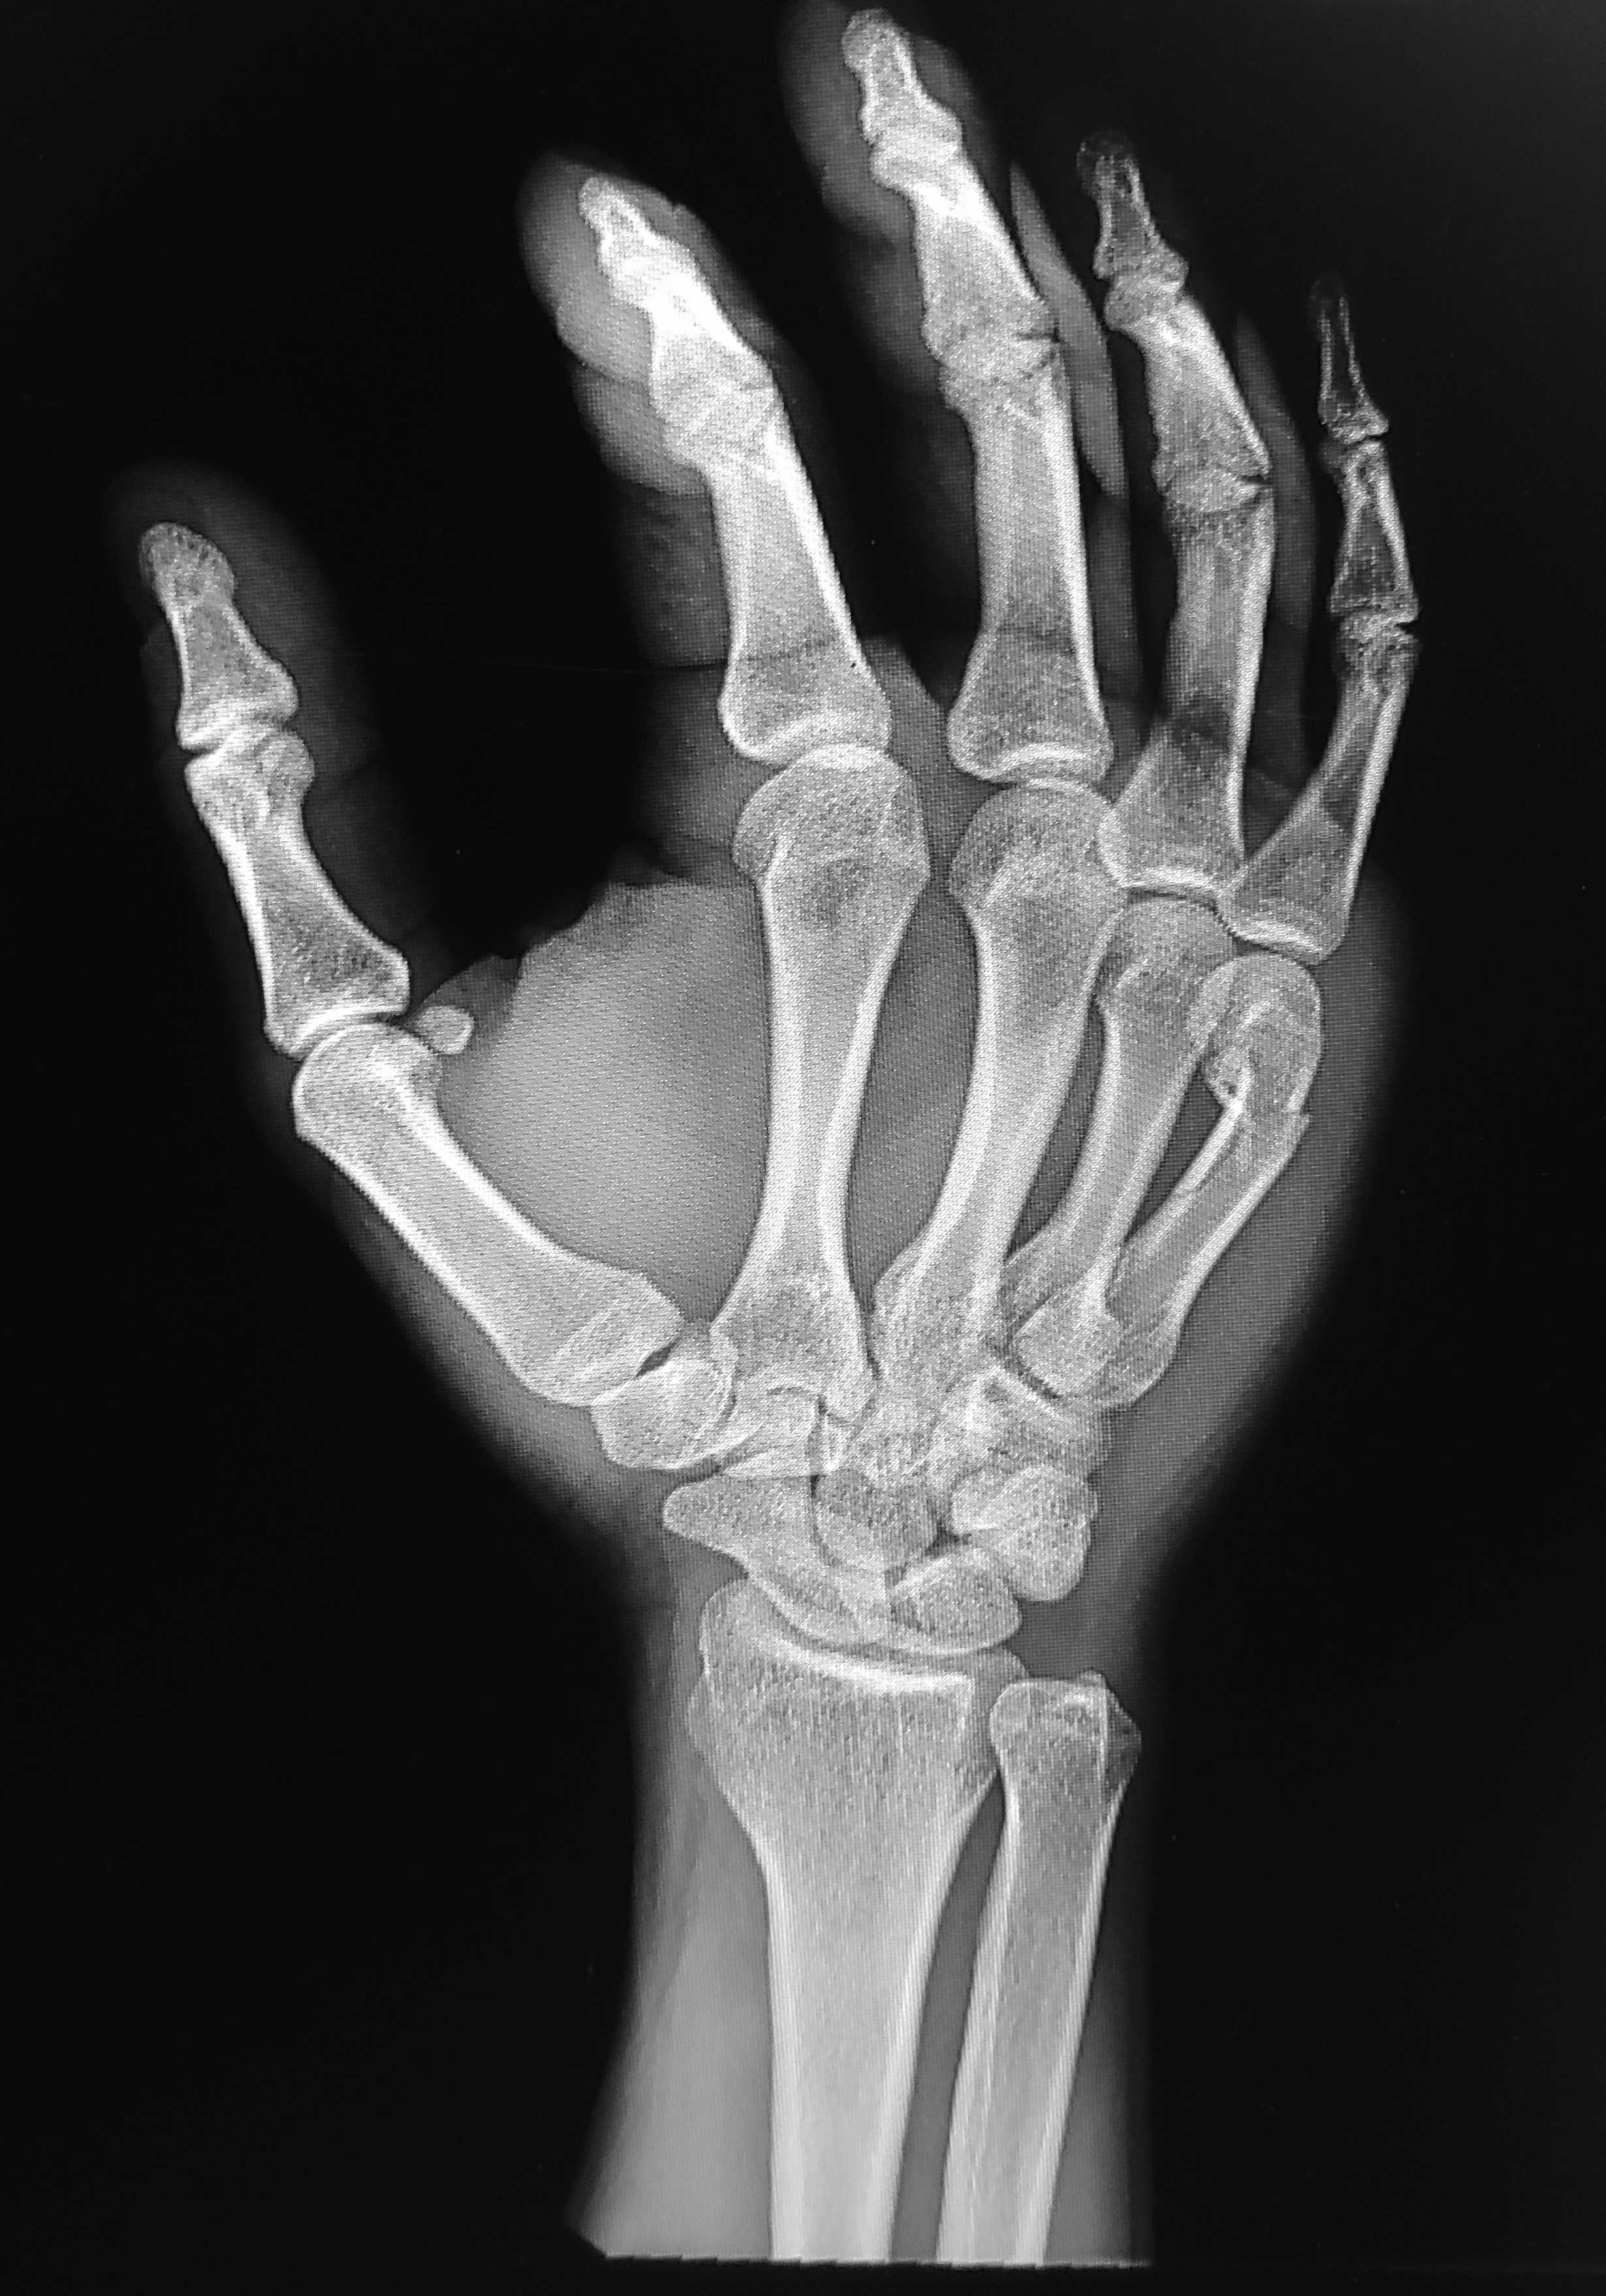 Boxer's fracture